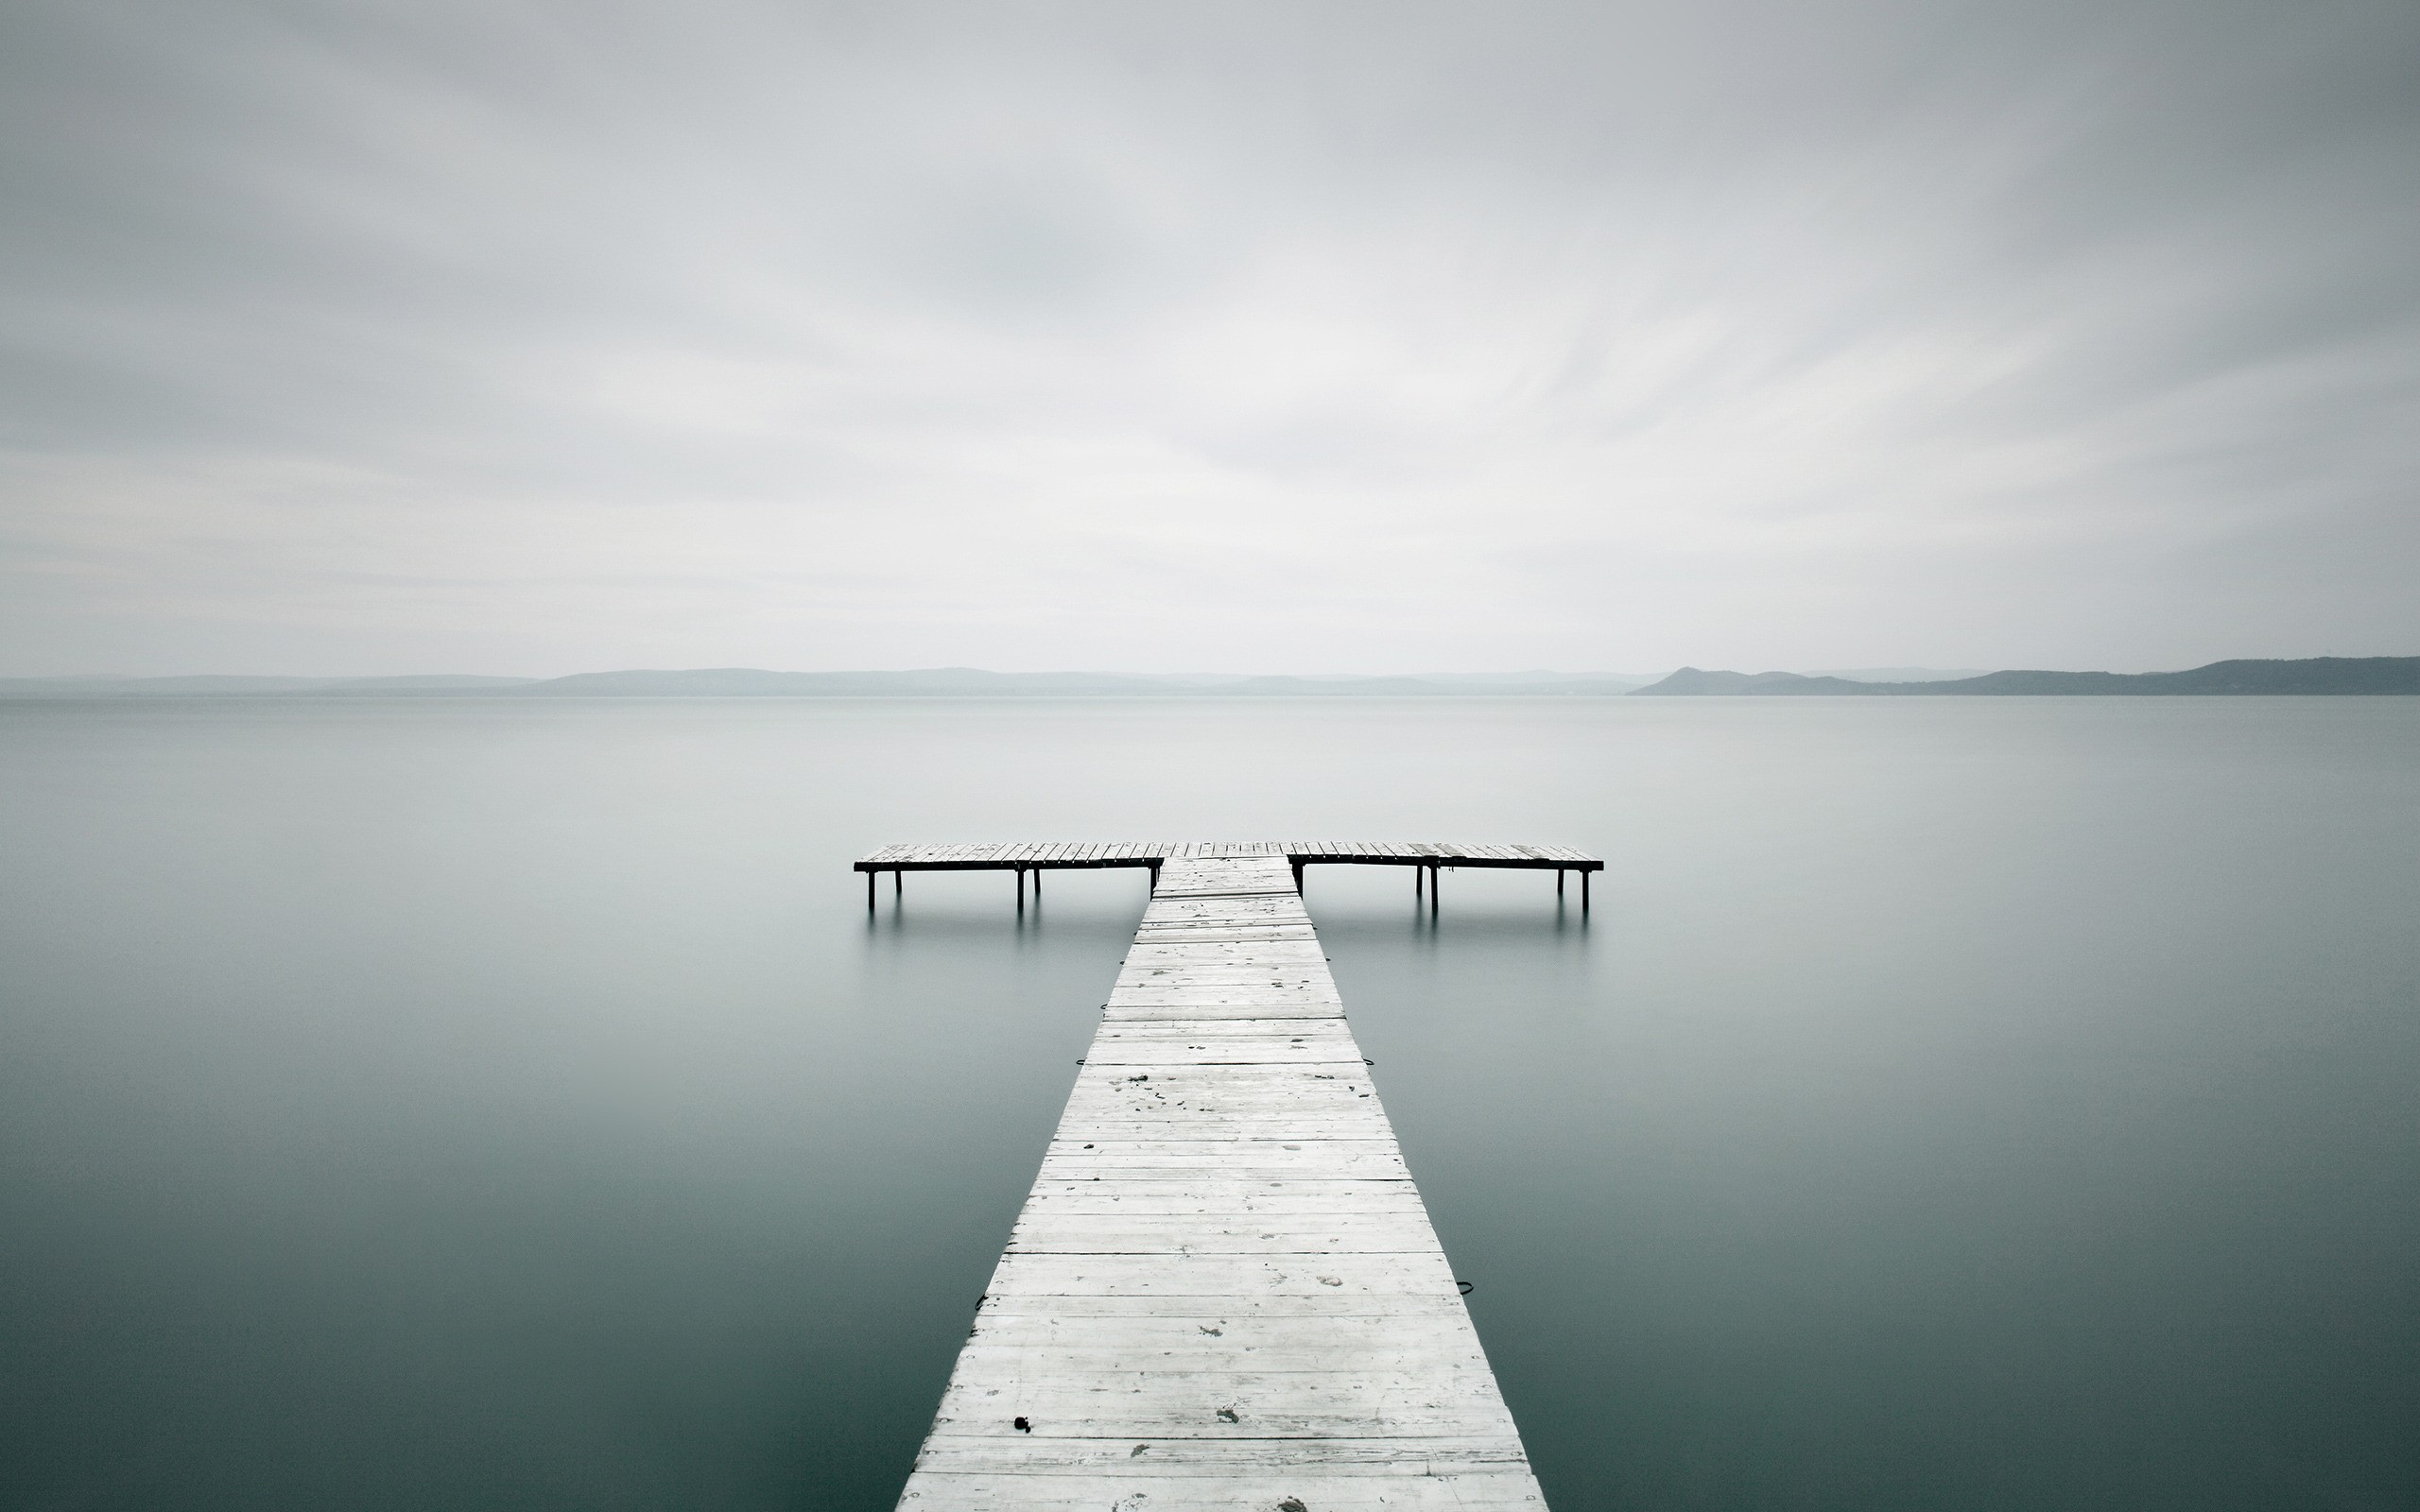 nature, Landscape, Water, Sea, Long exposure, Blurred, Horizon, Hills, Wood, Sticks, Pier, Clouds, Wooden surface, Bright, Photography, Lake Wallpaper